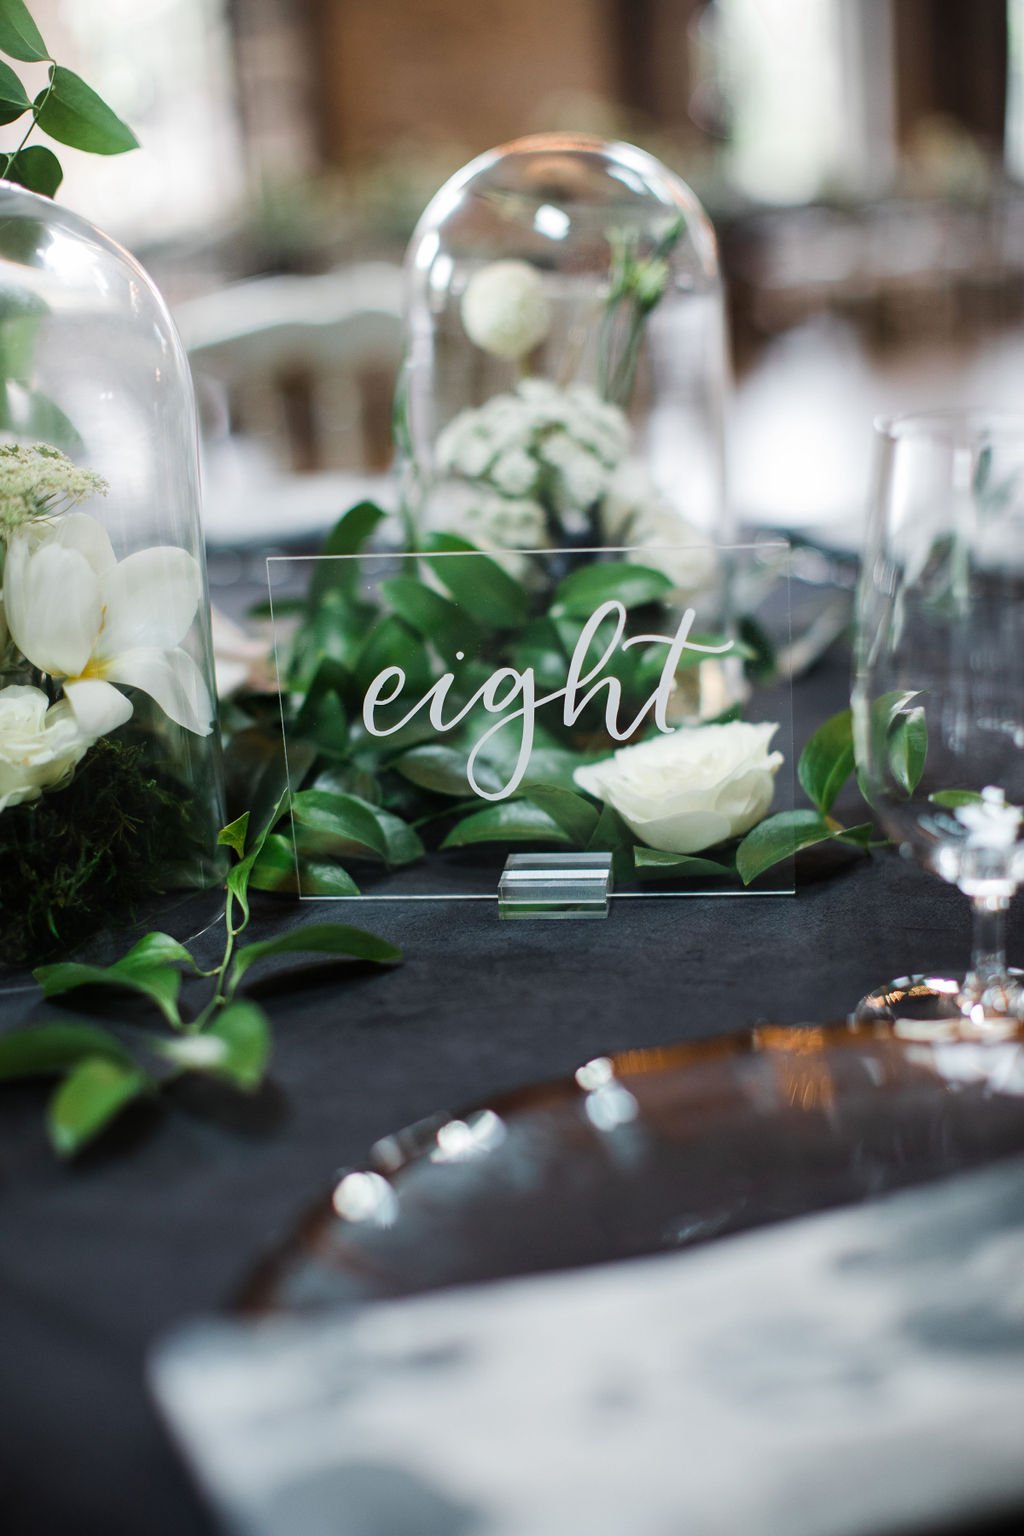 7x5 clear acrylic table numbers